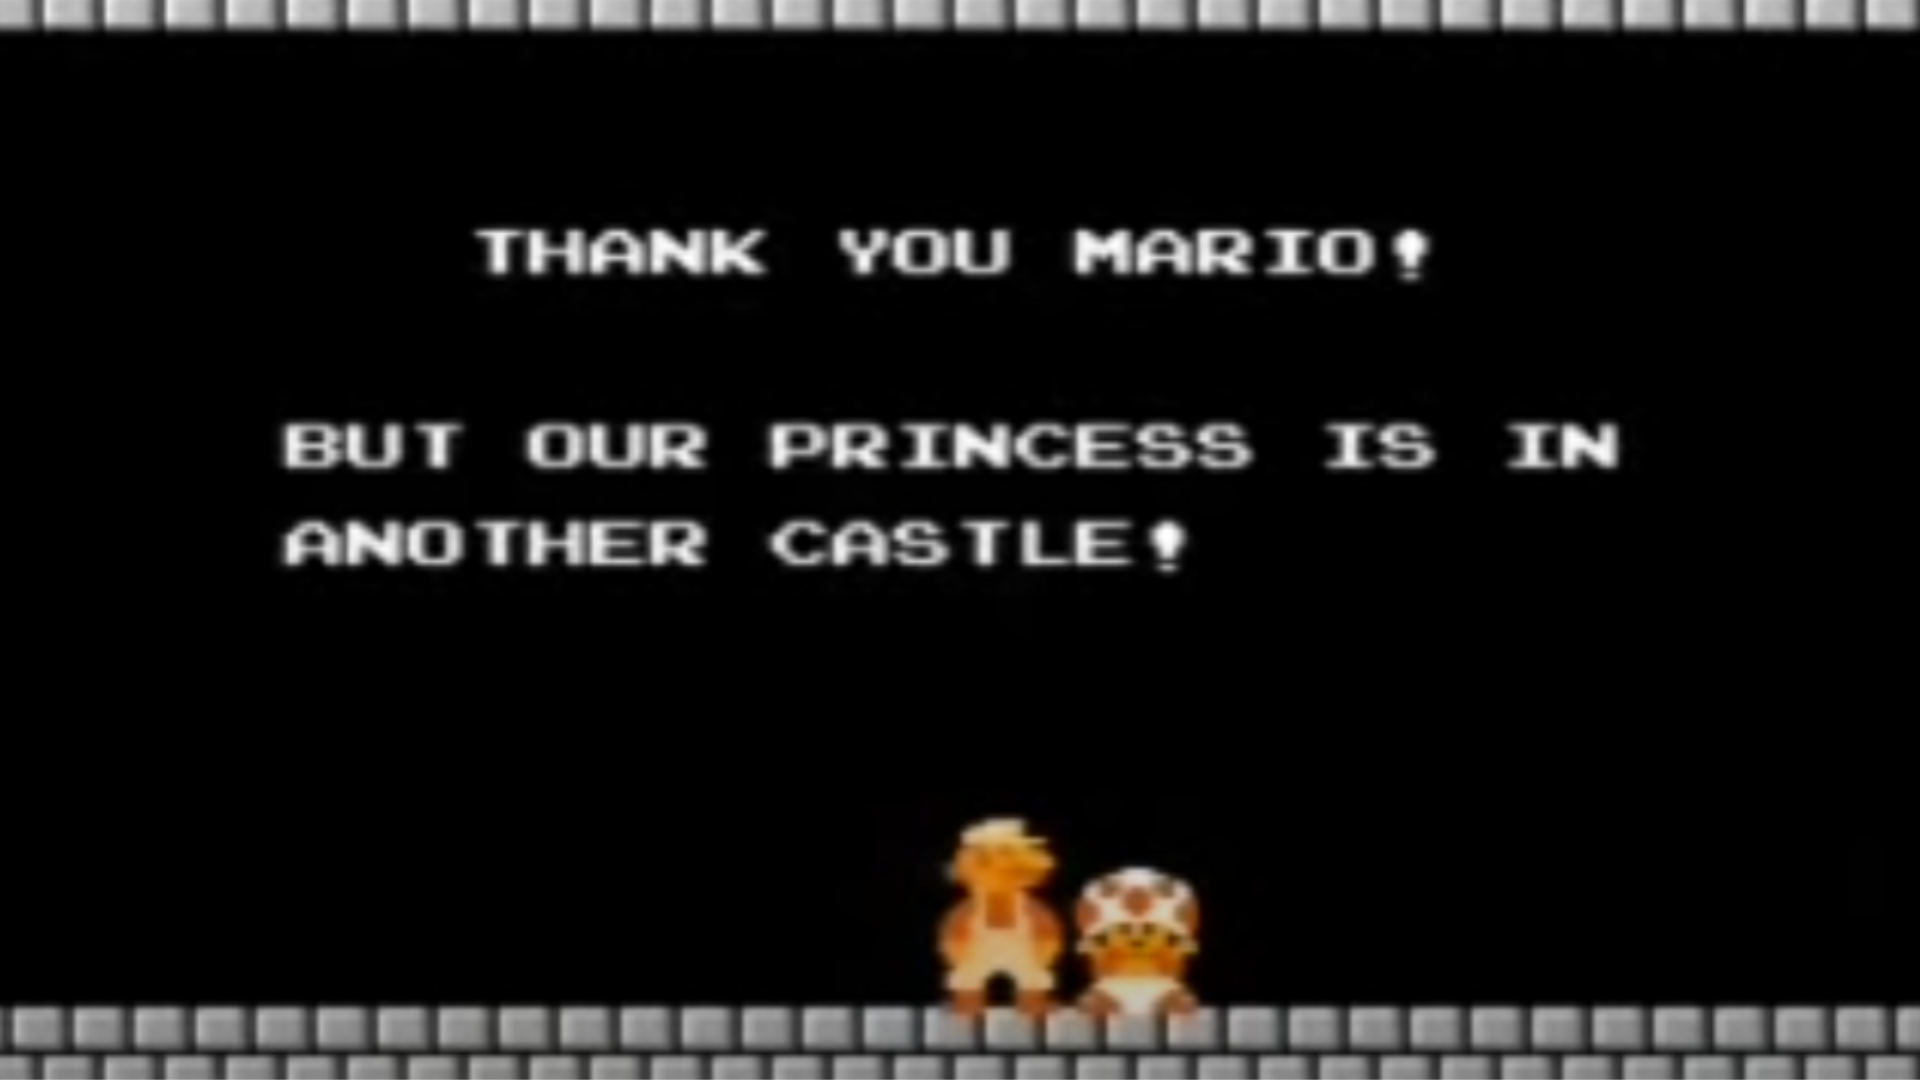 Thank You, Mario, But Our Princess Is In Another Castle!